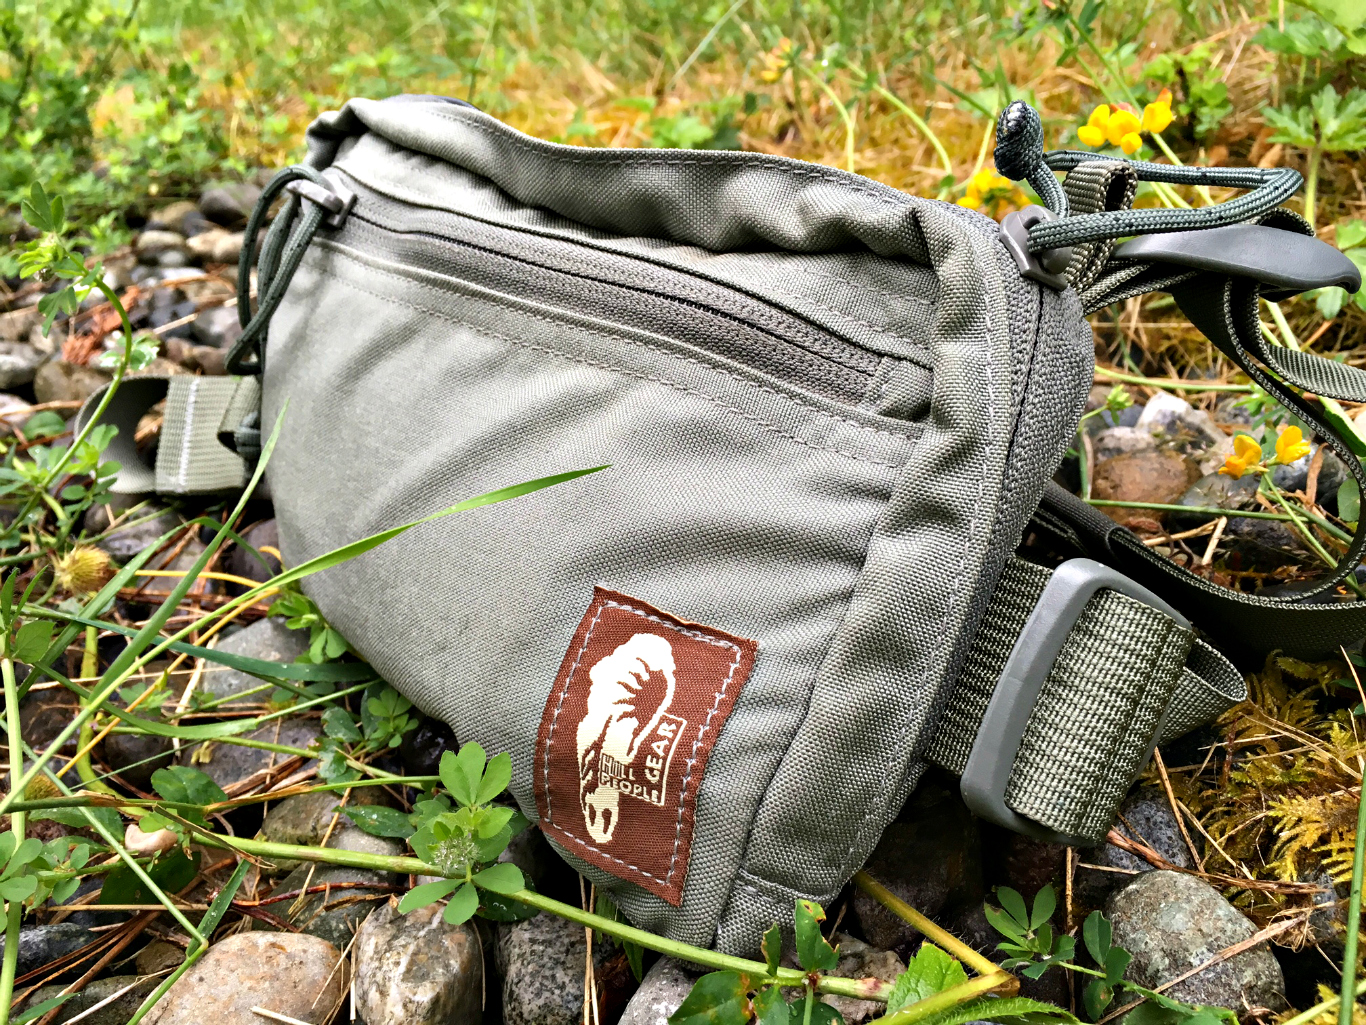 The Snubby Kit Bag by Hill People Gear | Kit Badger